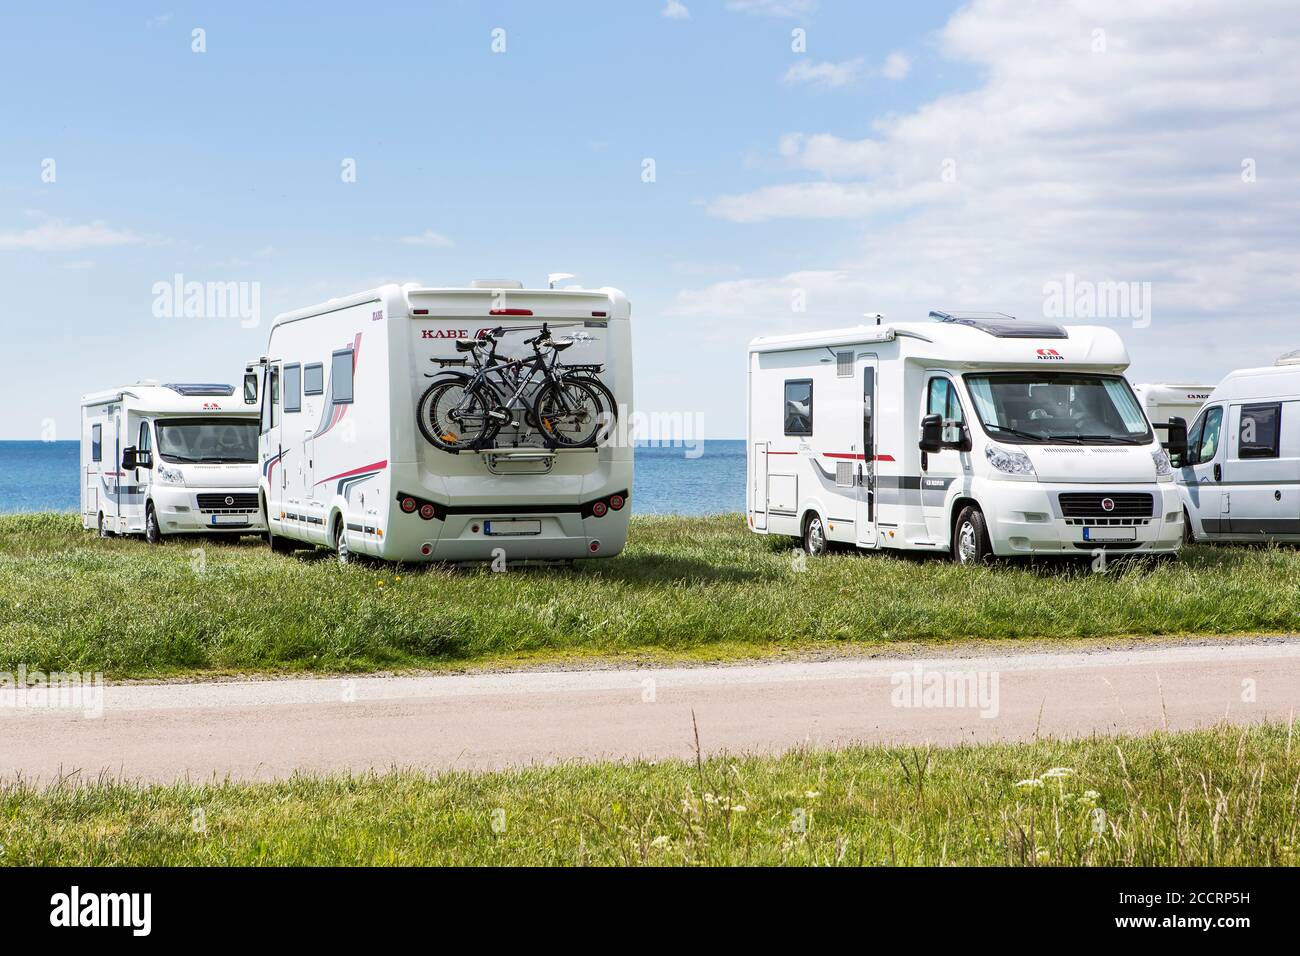 YSTAD, SWEDEN - MAY 29, 2014: The motorhome parking nearby central Ystad, Reningsverket,  is a popular place for tourists to visit. Stock Photo